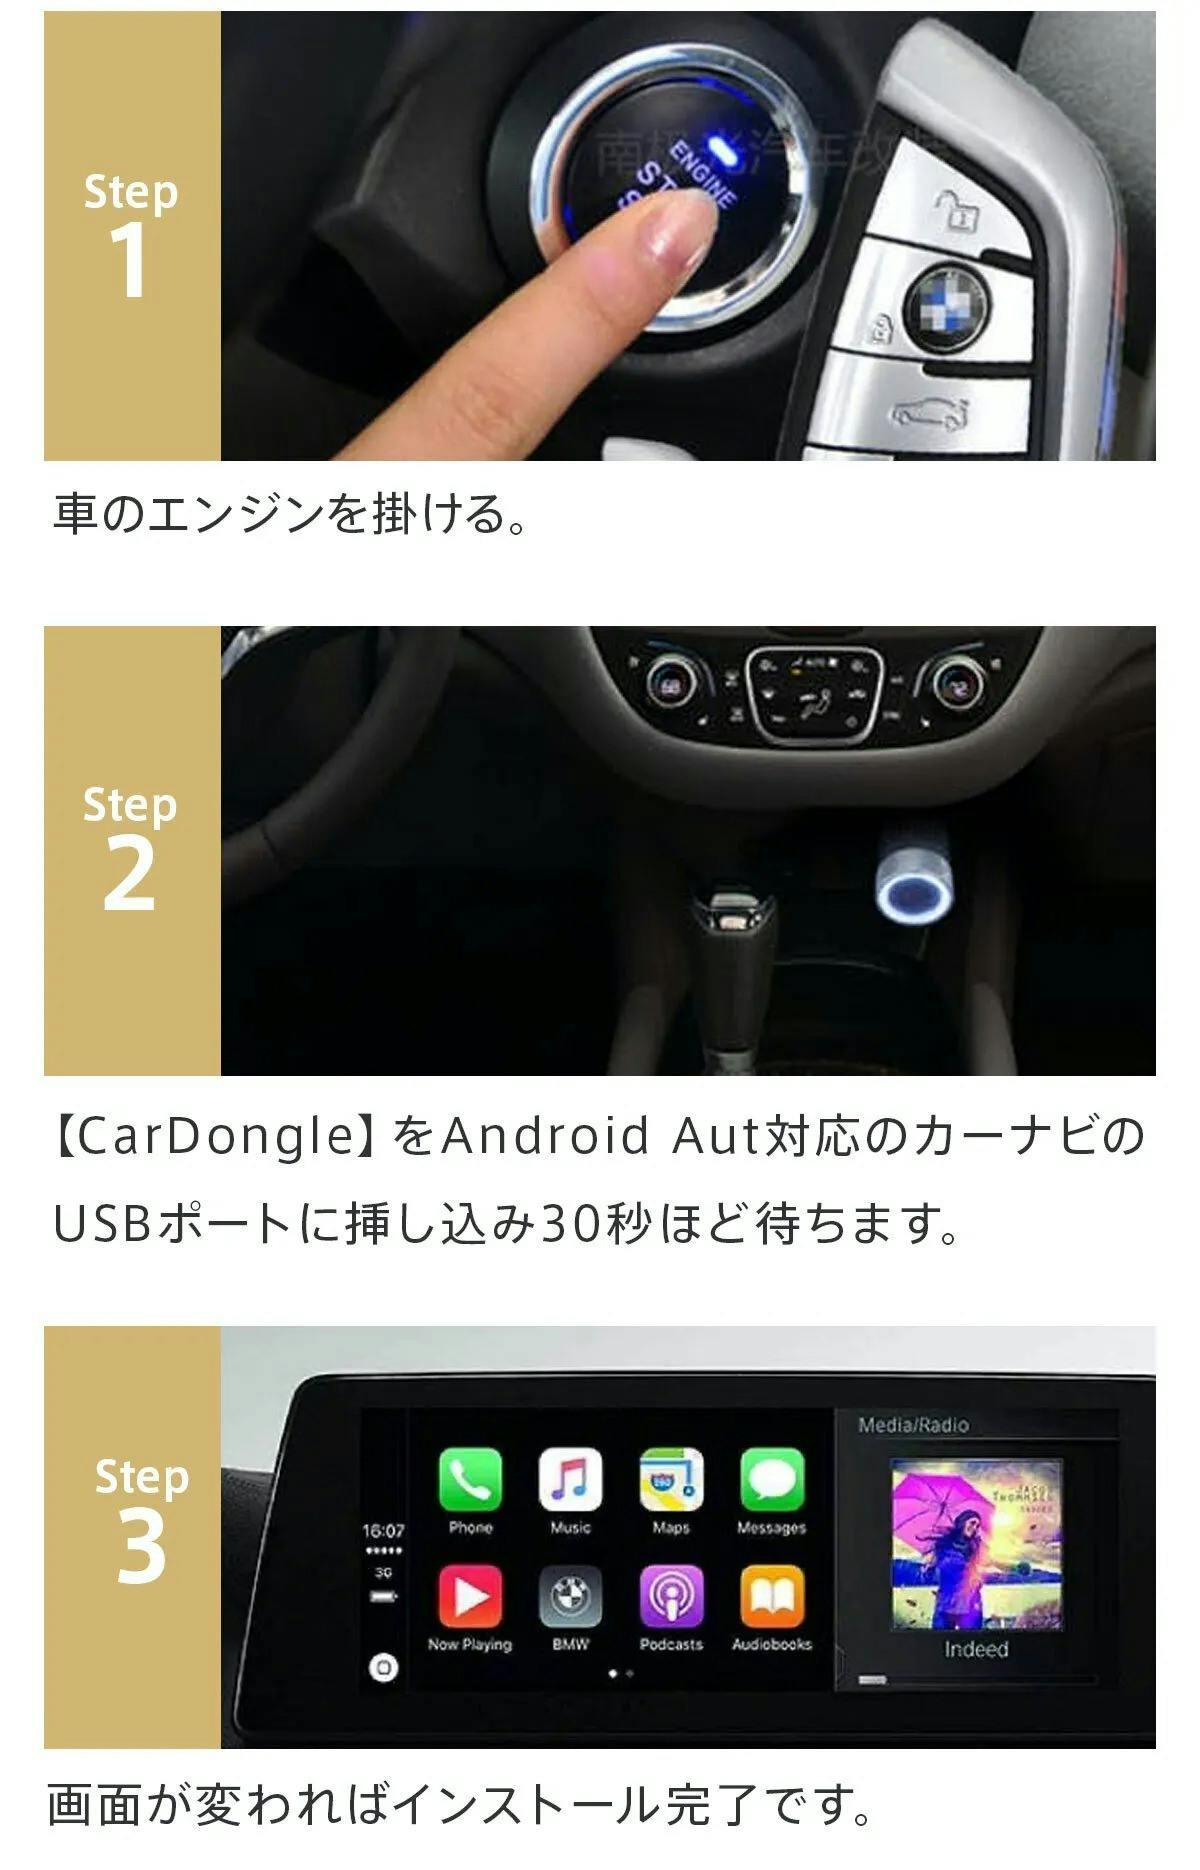 CarDongle Android搭載 車載ナビ 車載動画And